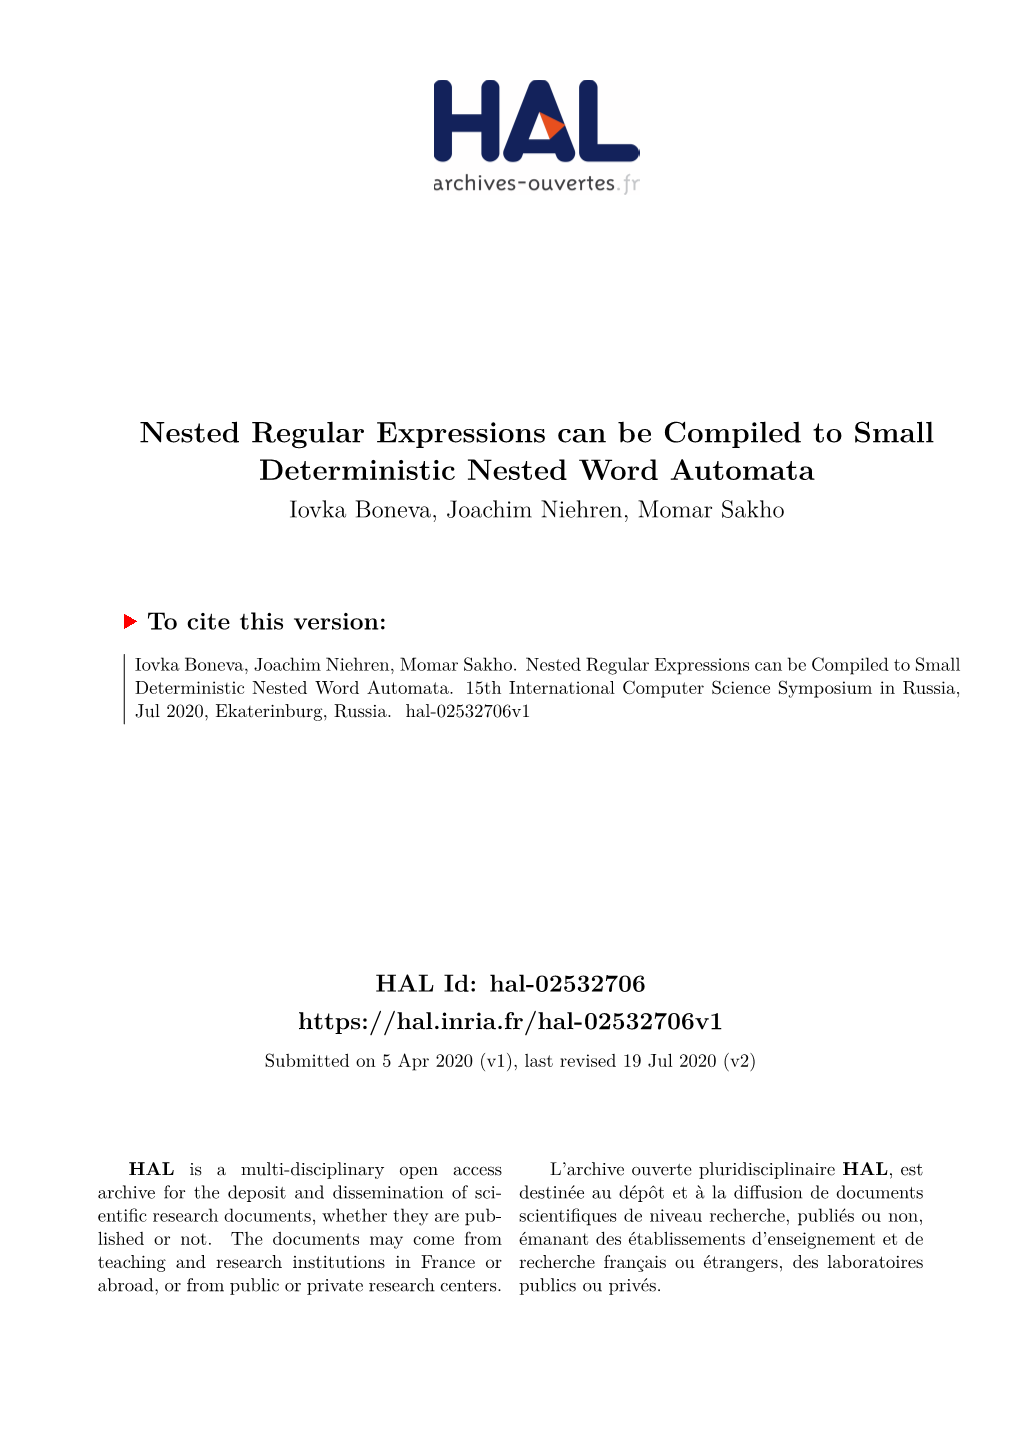 Nested Regular Expressions Can Be Compiled to Small Deterministic Nested Word Automata Iovka Boneva, Joachim Niehren, Momar Sakho